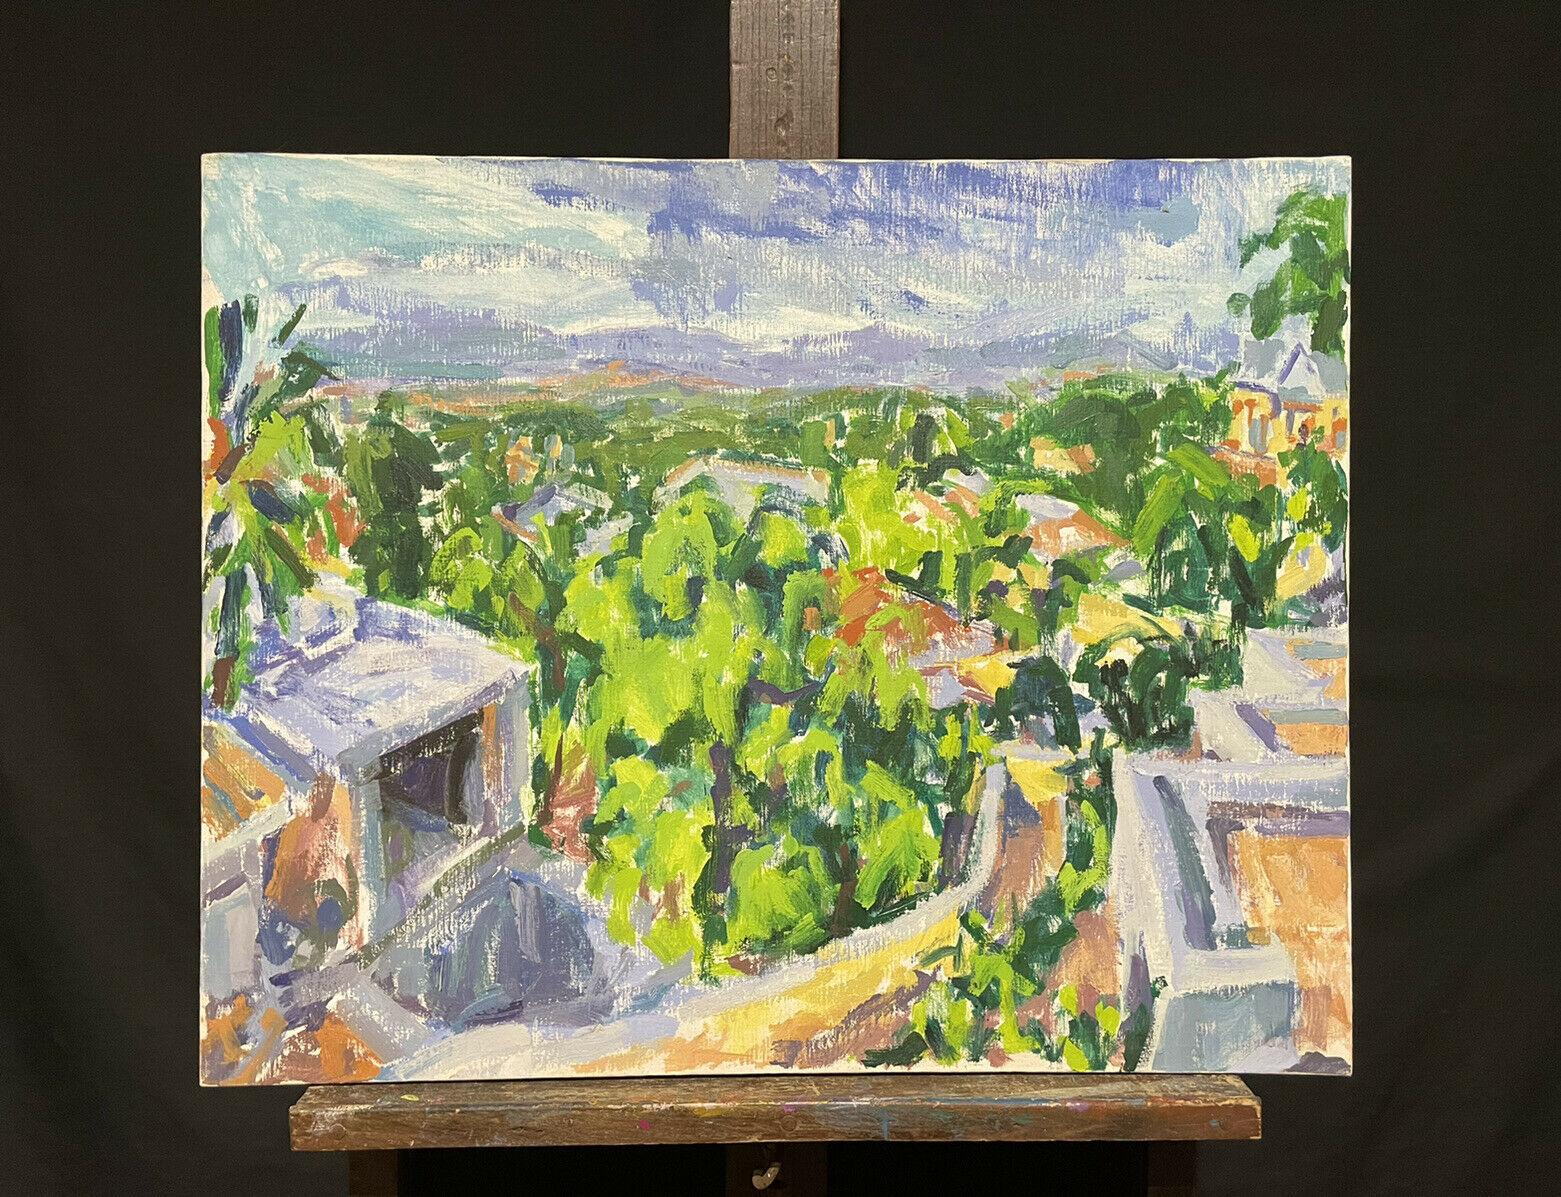 NO RESERVE AUCTION!

Artist/ School/ Date:
French School, mid 20th century. 

Title: 
Summer landscape and far reaching view over lush green French landscape

Medium & Size: 
oil painting on canvas: 24 x 30 inches 
                           